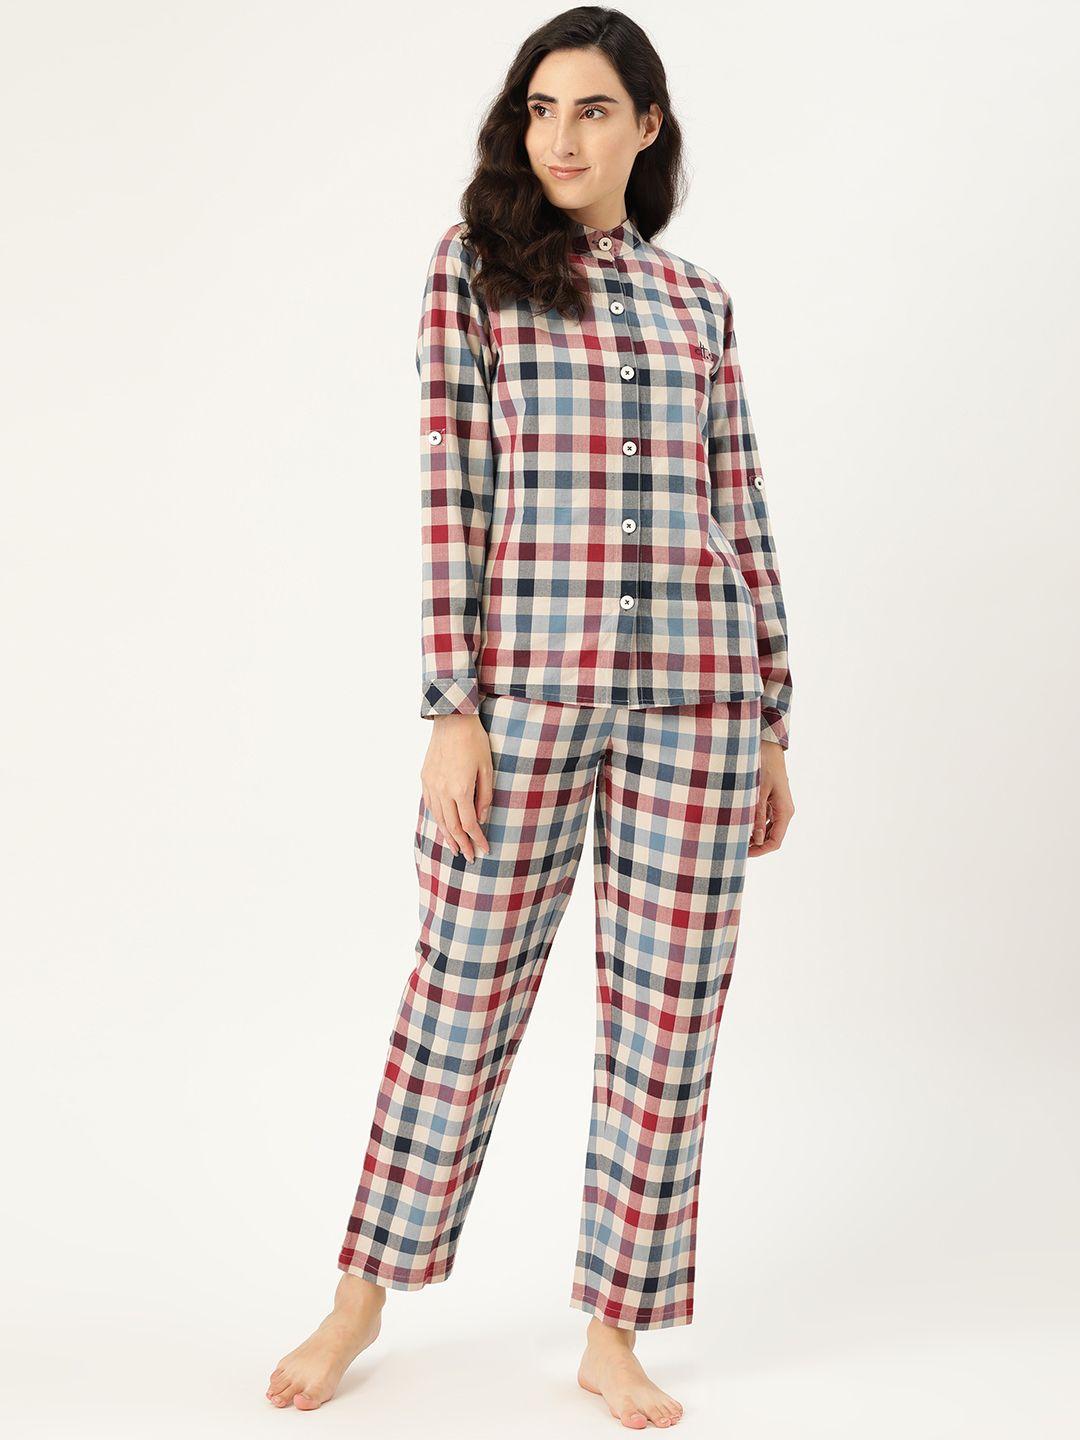 clt-s-women-multicoloured-checked-night-suit